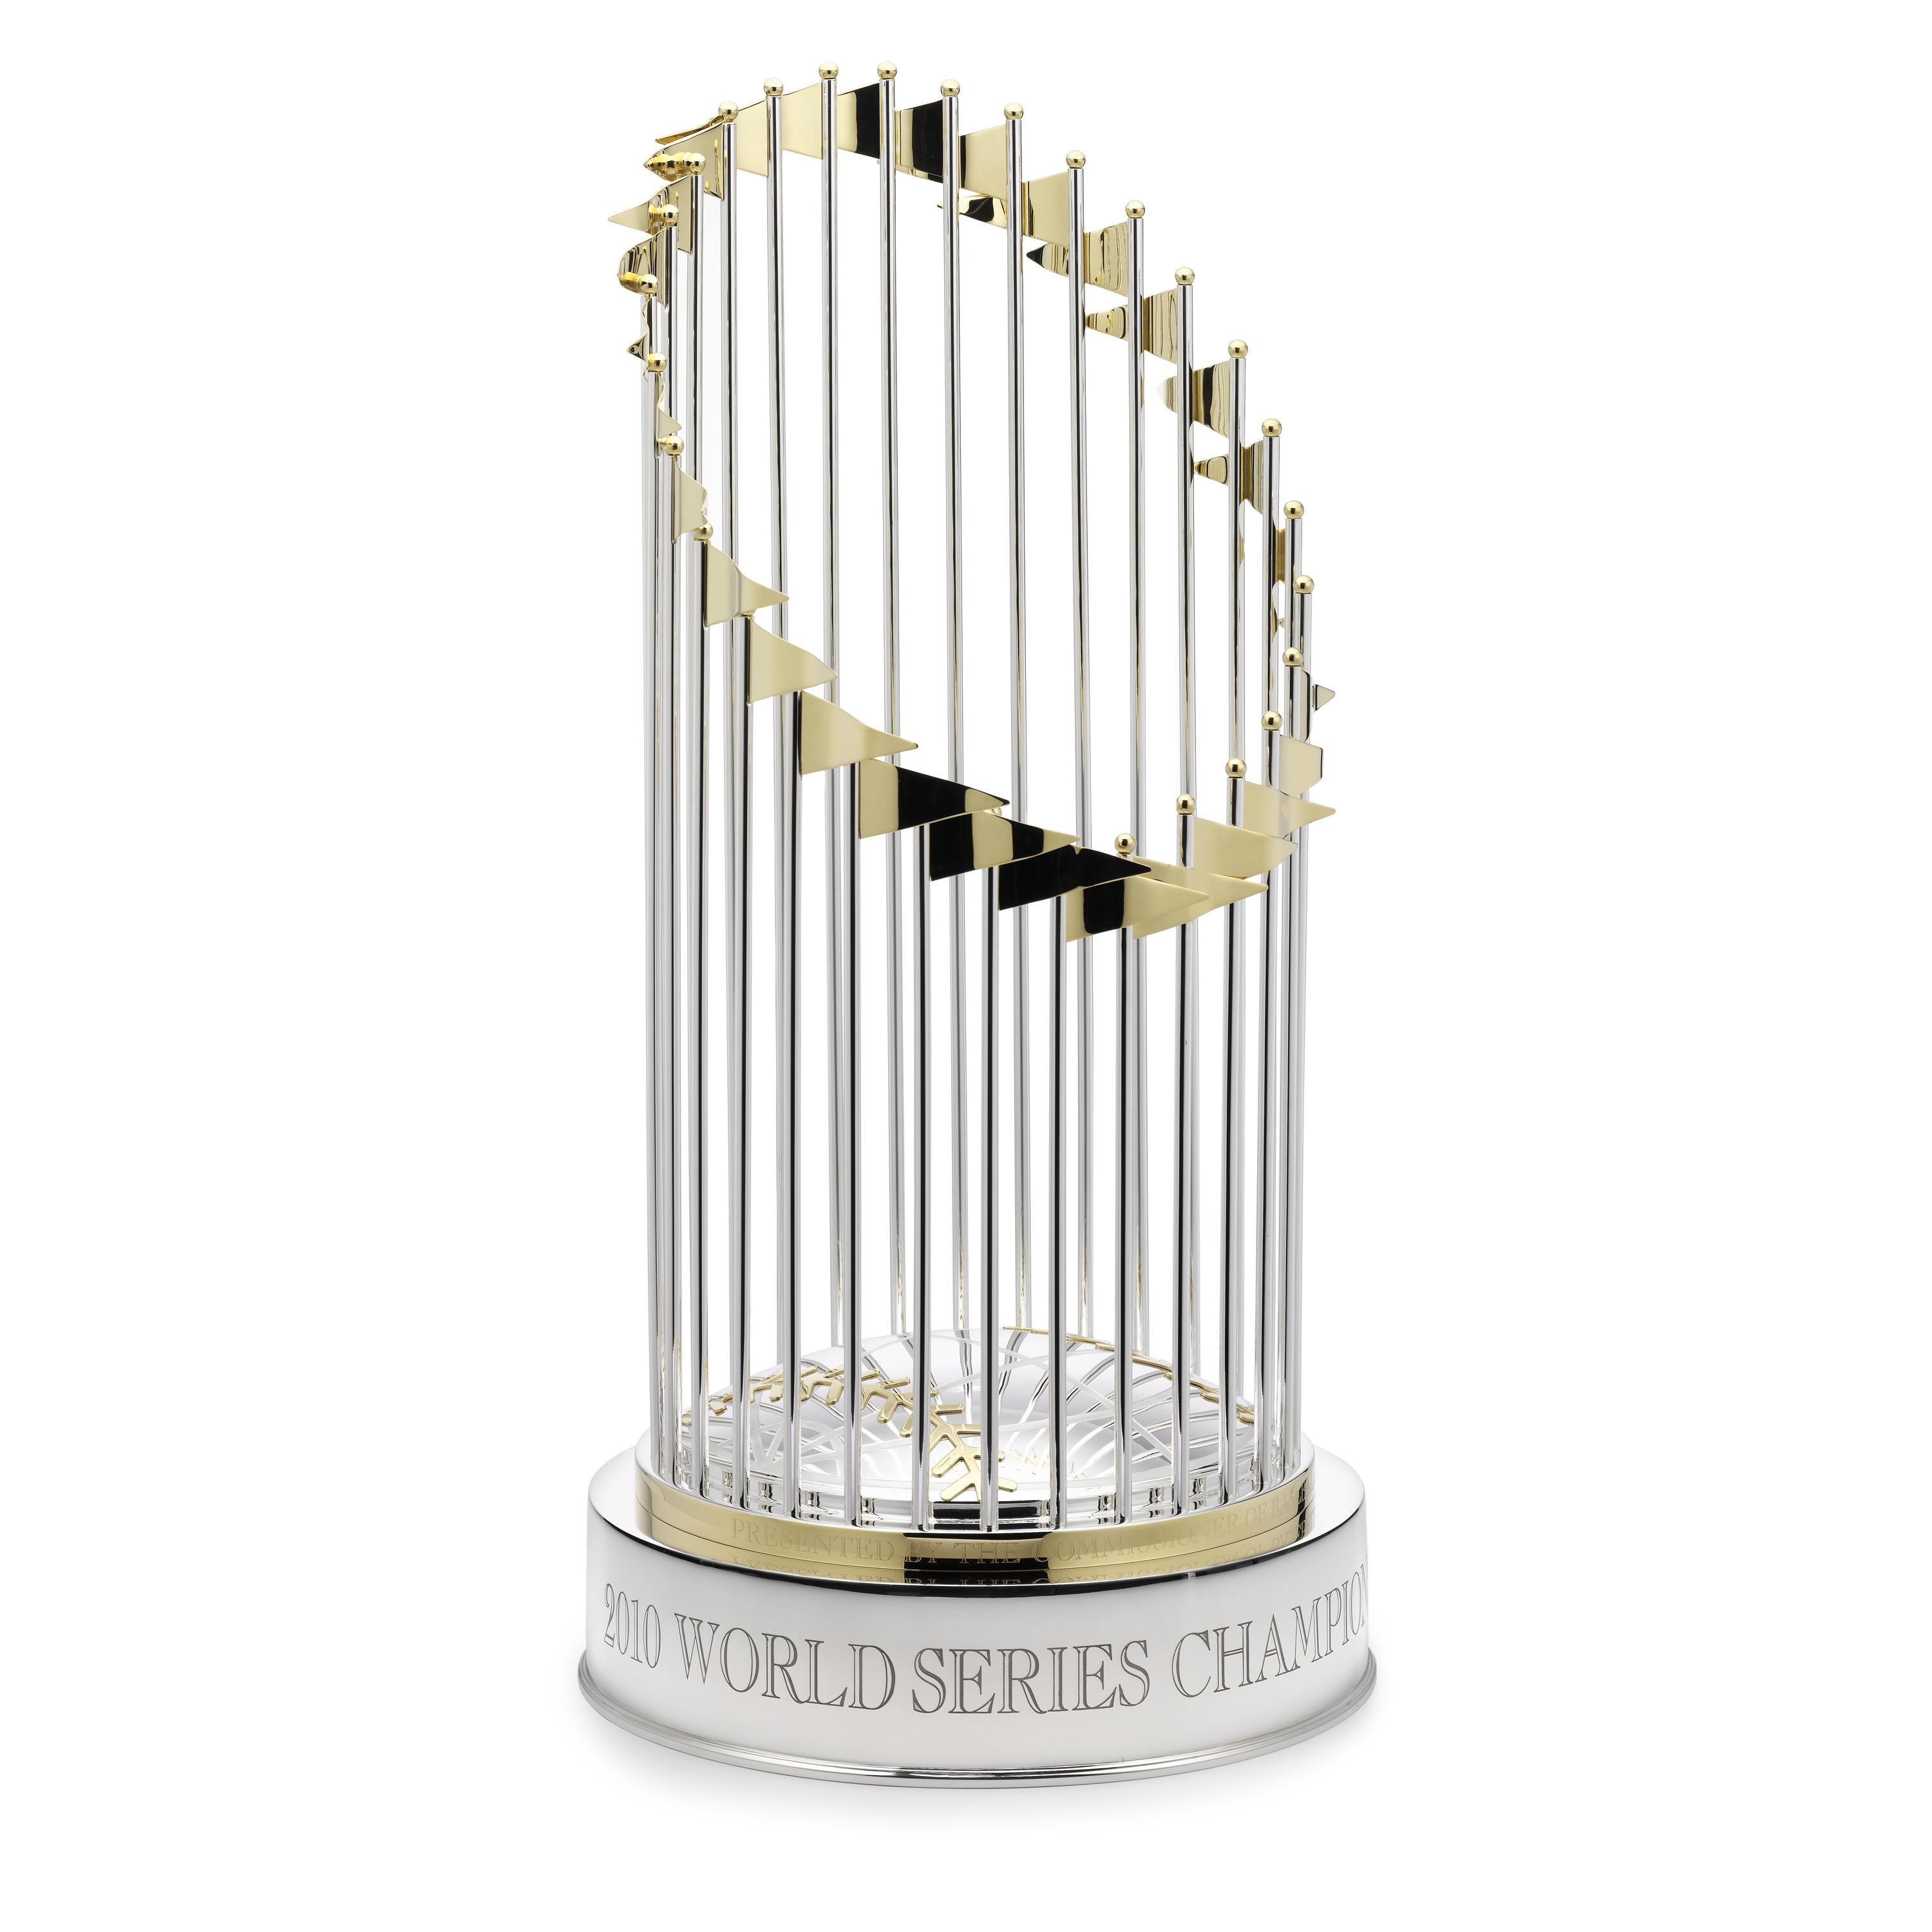 The World Series Trophy 